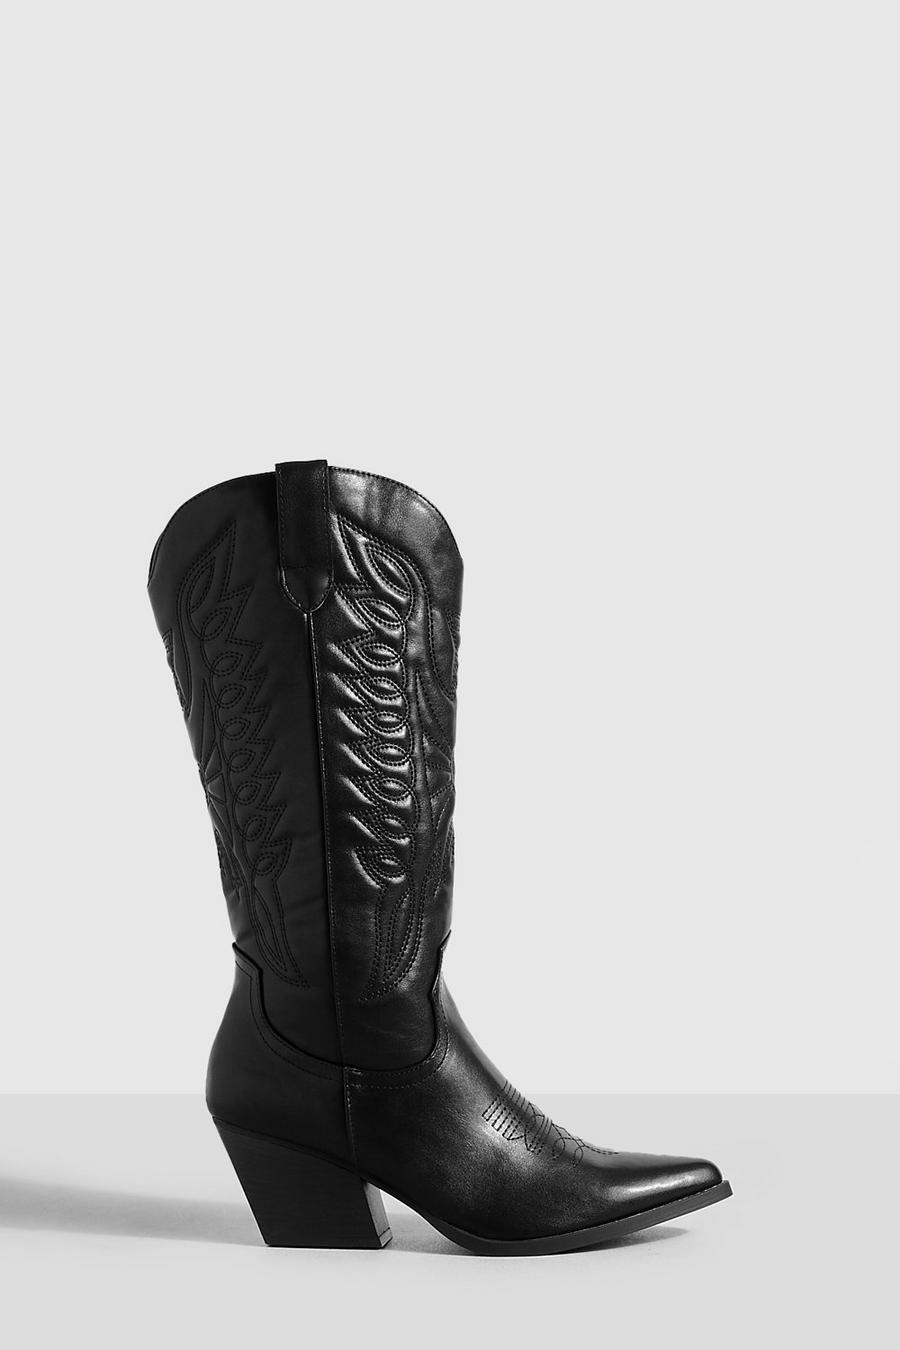 Black Tonal Embroidered Western Cowboy Boots